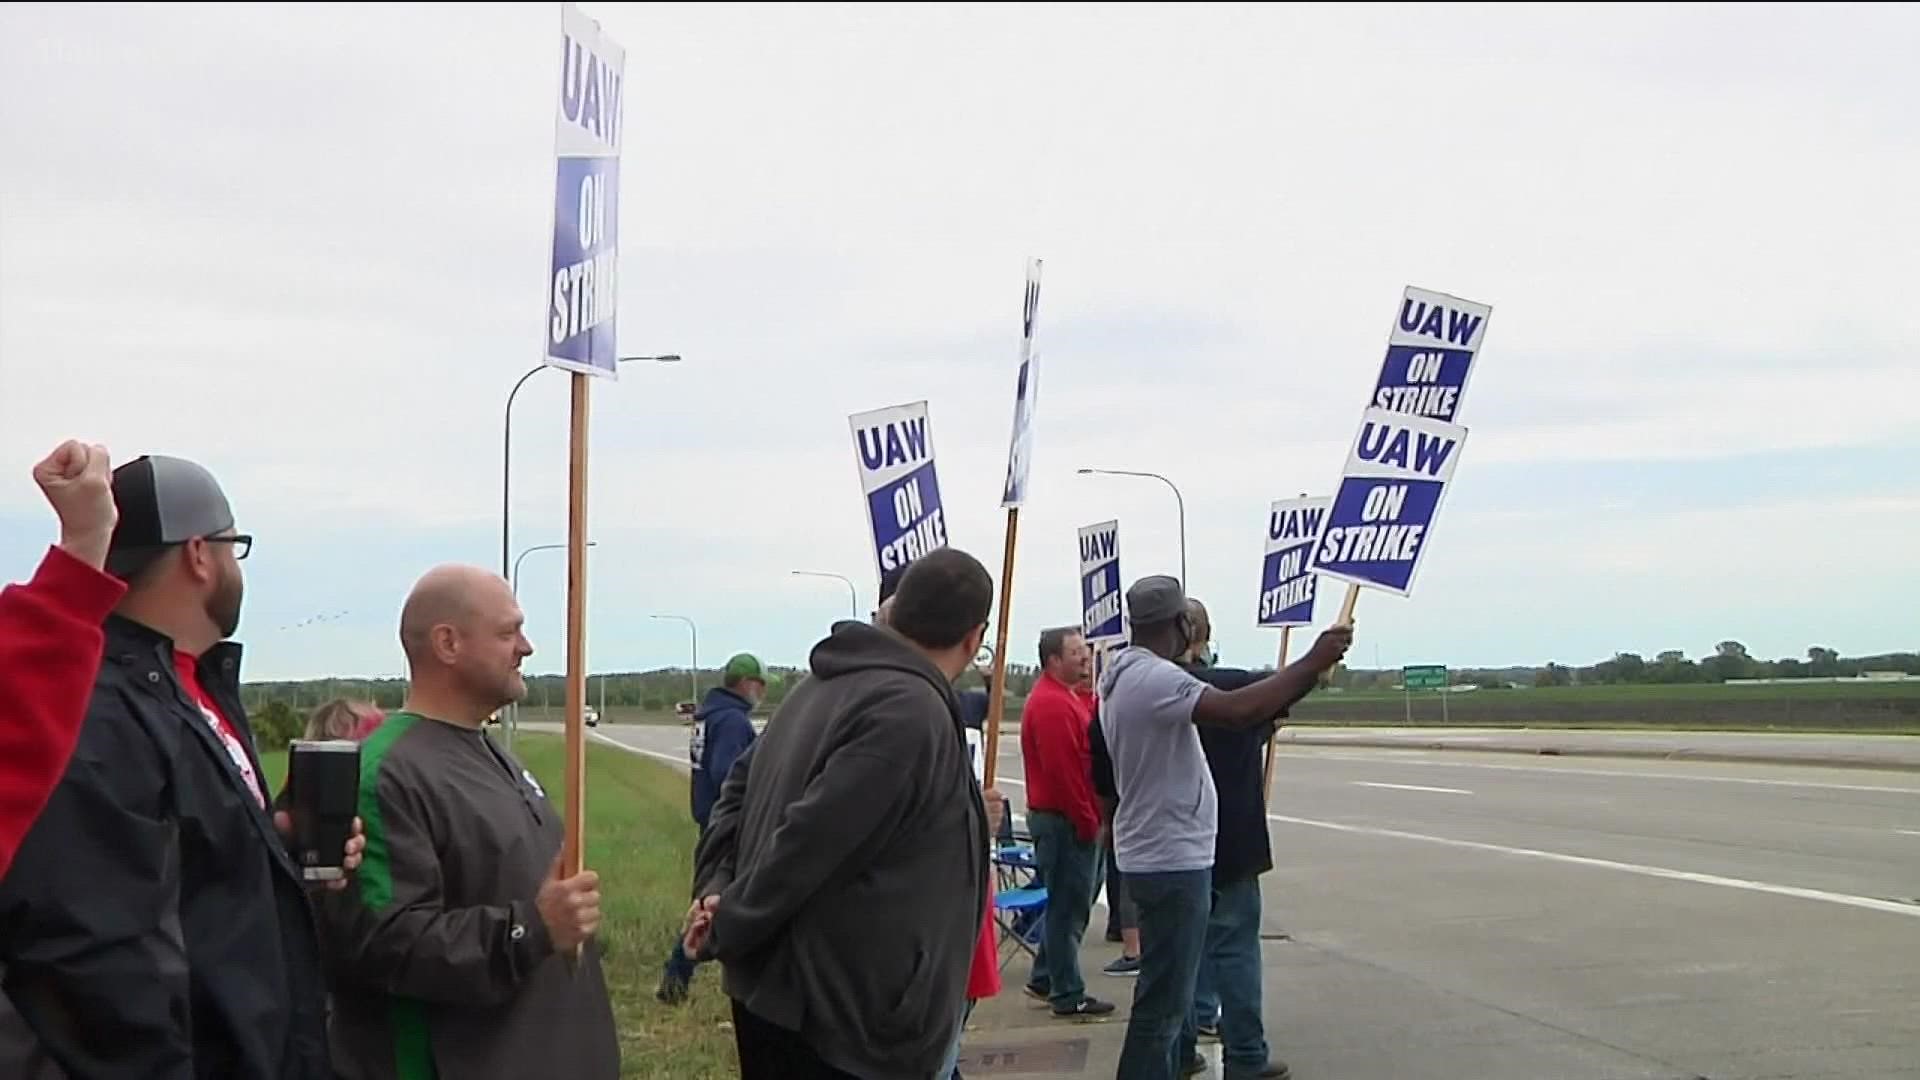 More than 10,000 workers, members of the United Auto Workers union, are on strike.